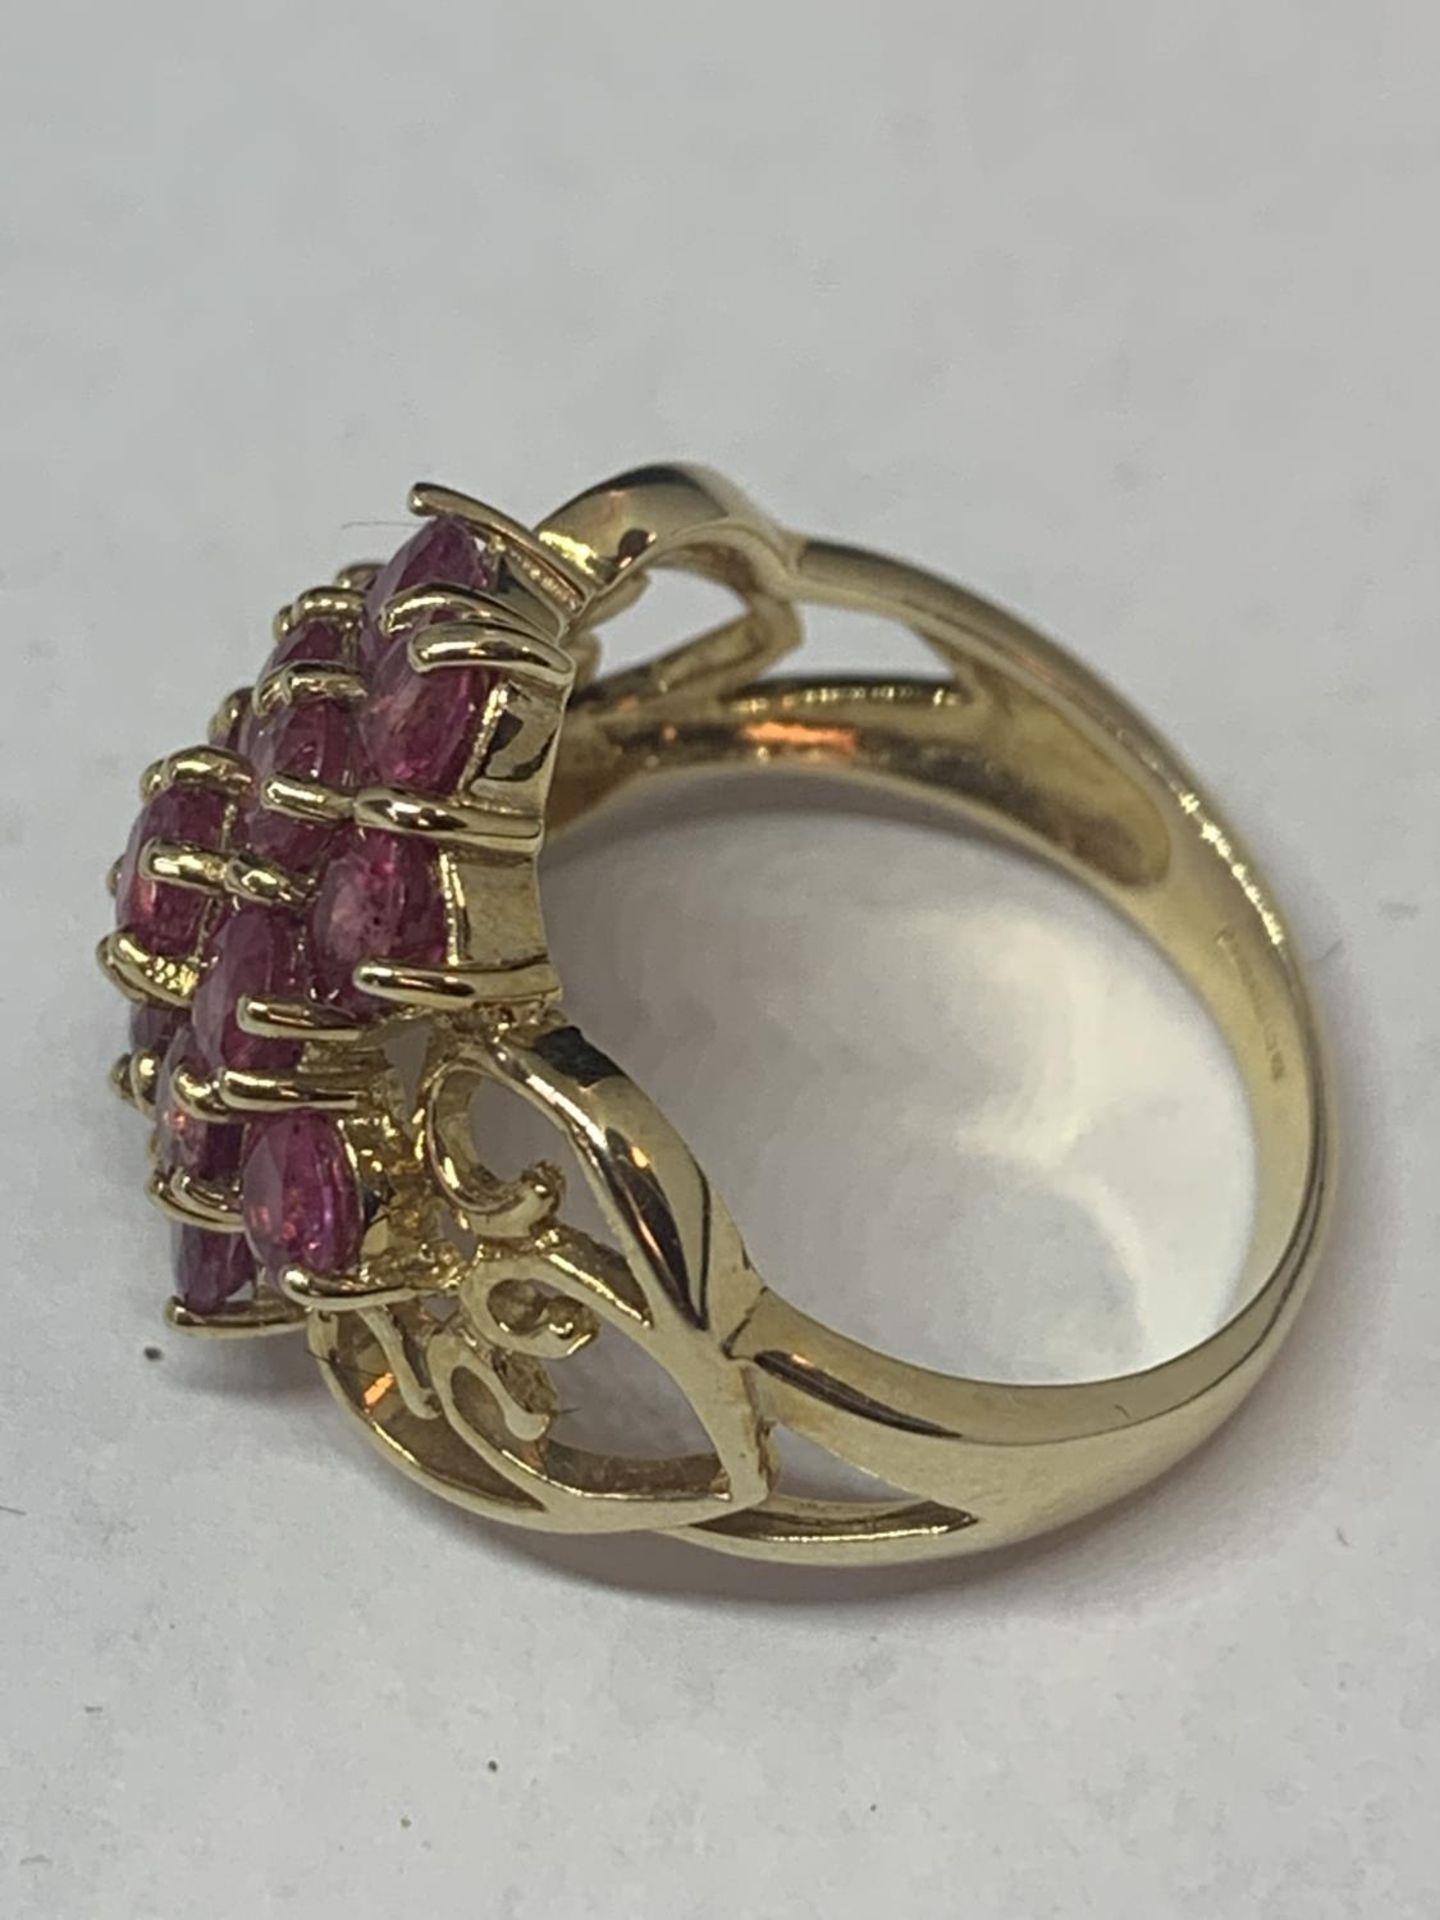 A 9 CARAT GOLD RING MARKED 375 WITH FIFTEEN PINK COLOURED STONES IN A CLUSTER DESIGN AND - Image 2 of 8